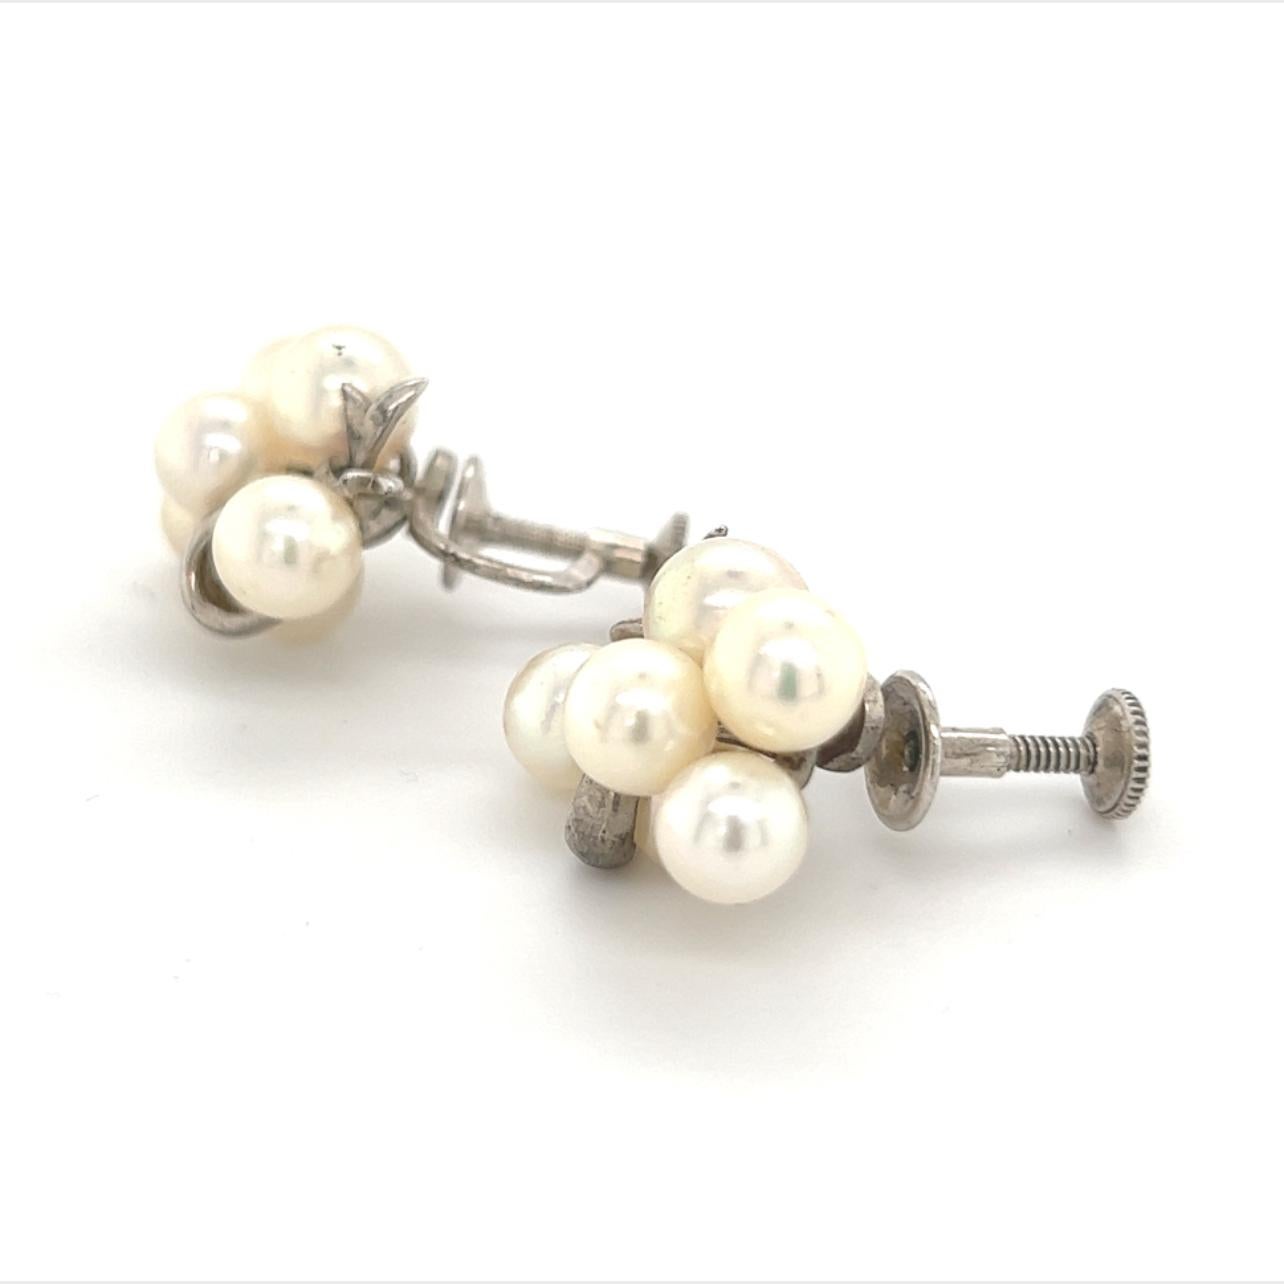 Mikimoto Estate Akoya Pearl Earrings Sterling Silver 6.65 mm 7.2 Grams In Good Condition For Sale In Brooklyn, NY